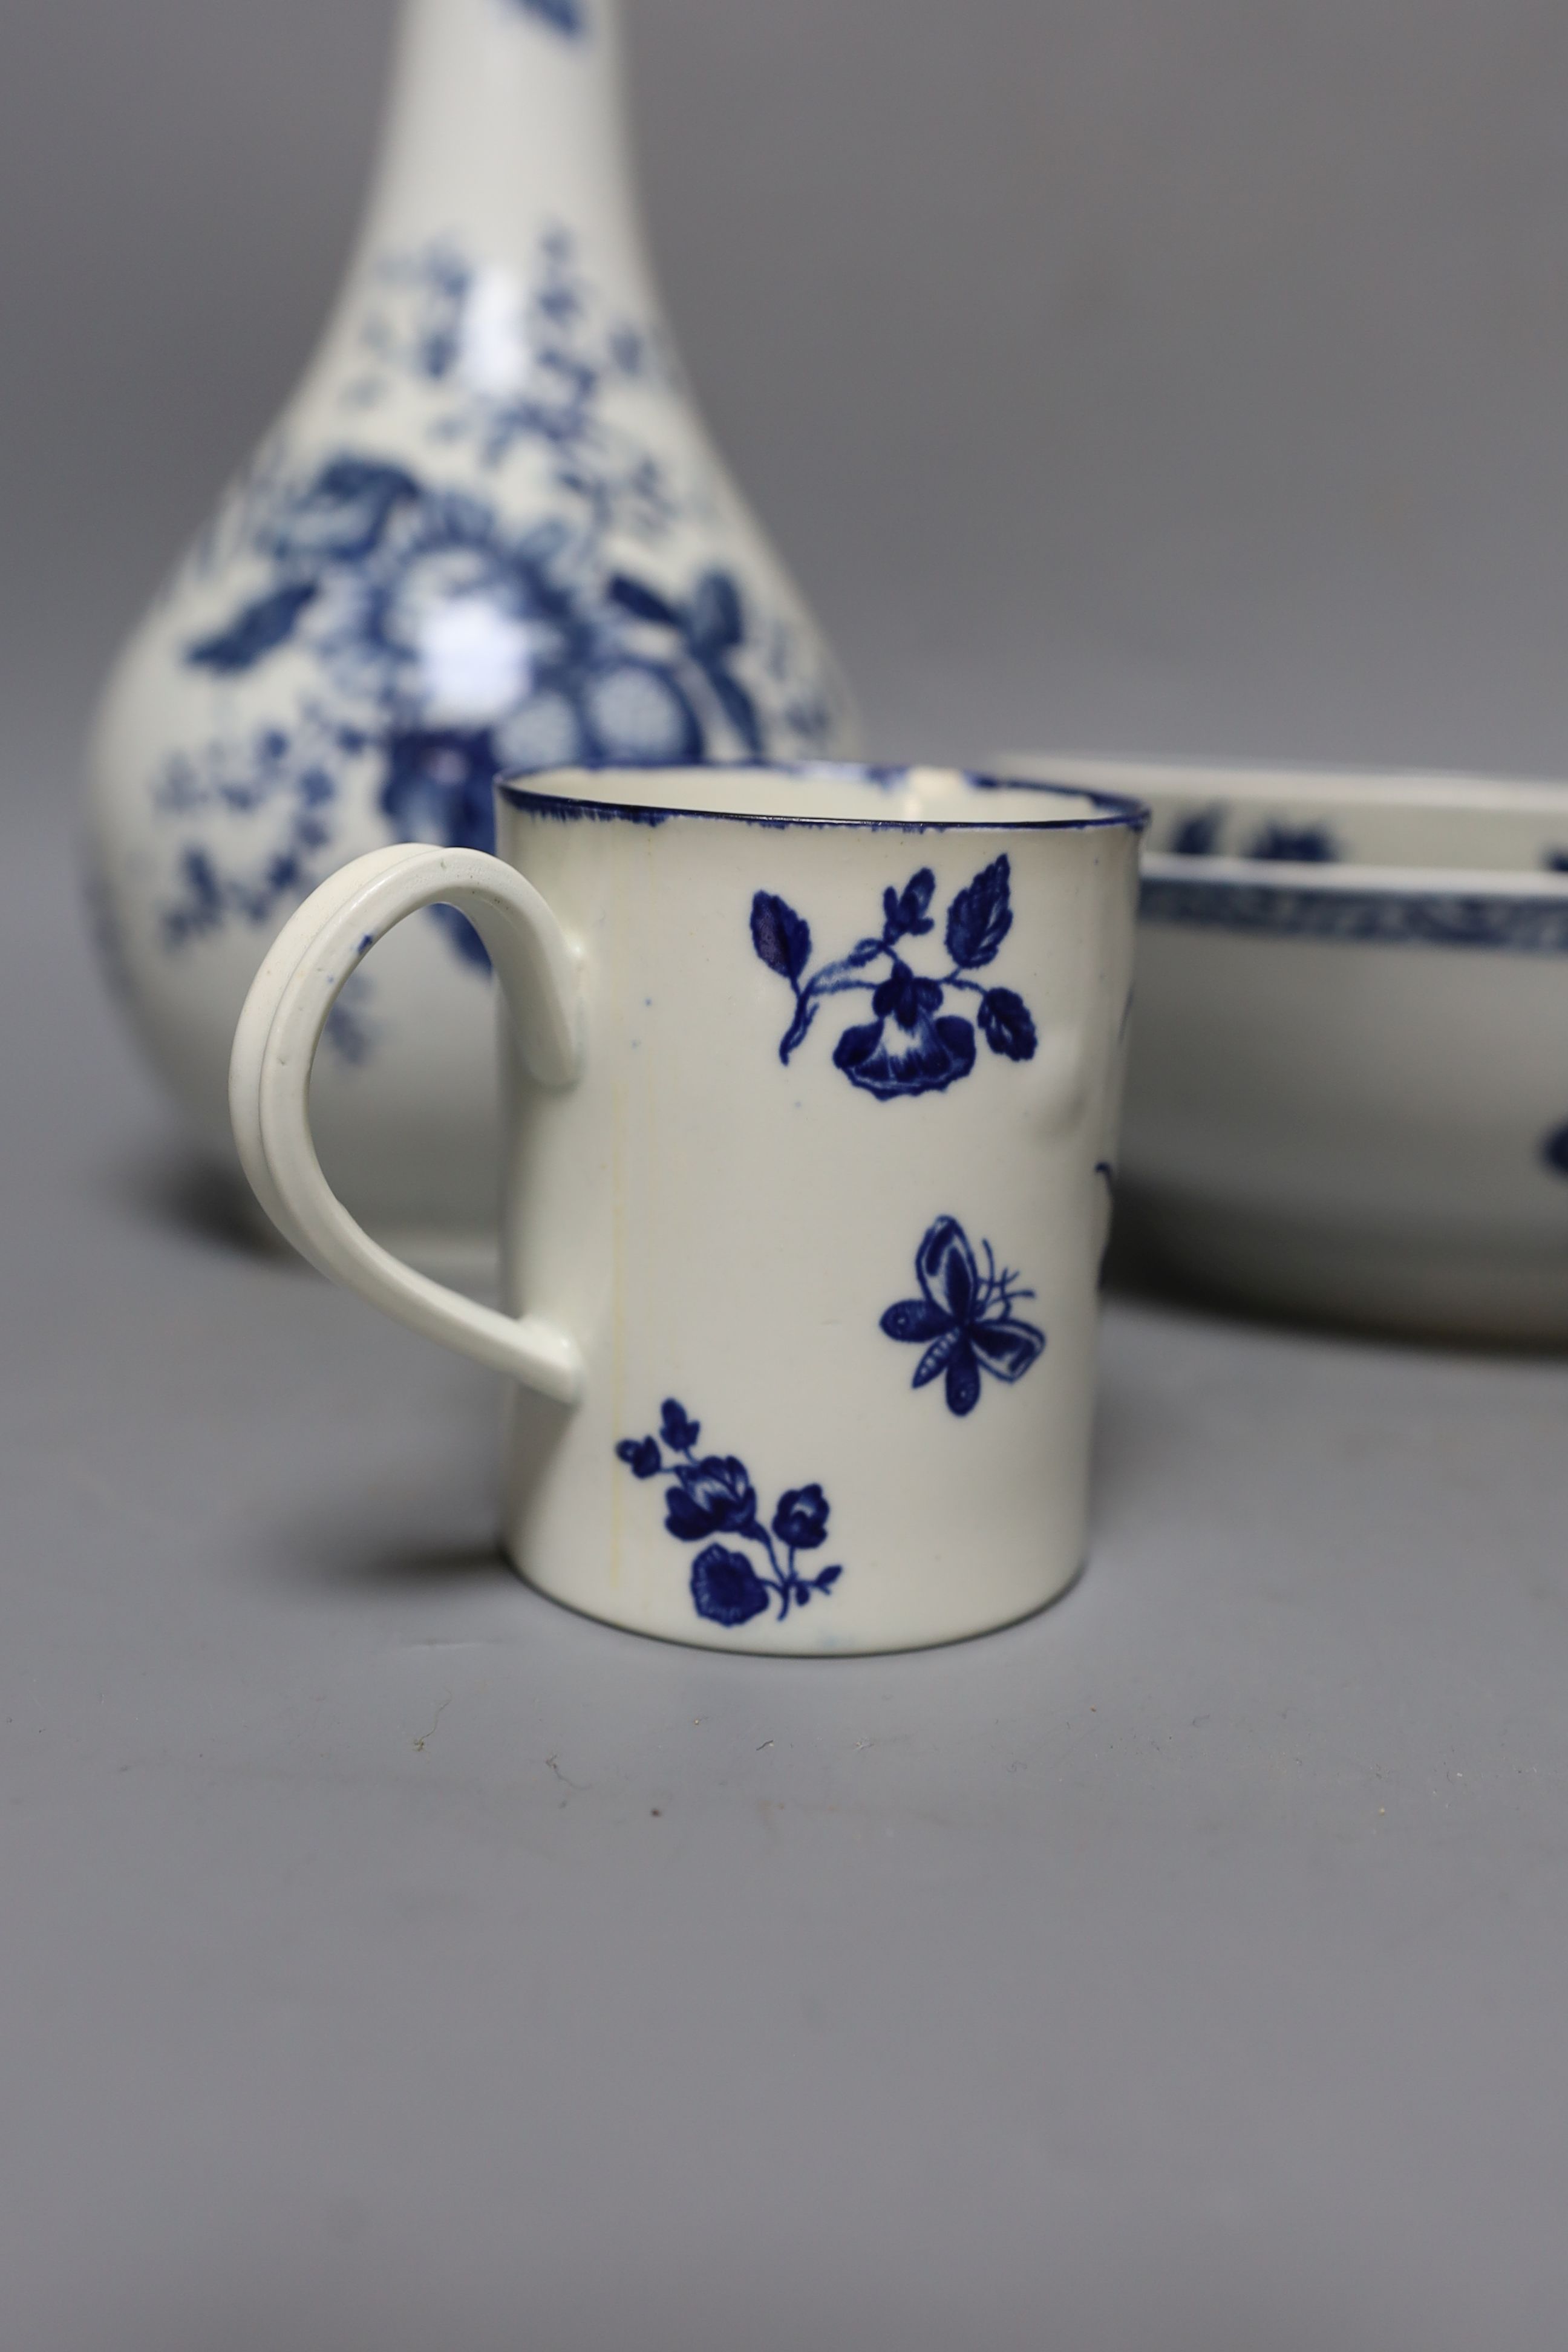 A Chaffers Liverpool rare bowl, a Worcester bowl, a mug with the Gilliflower pattern, three - Image 7 of 18